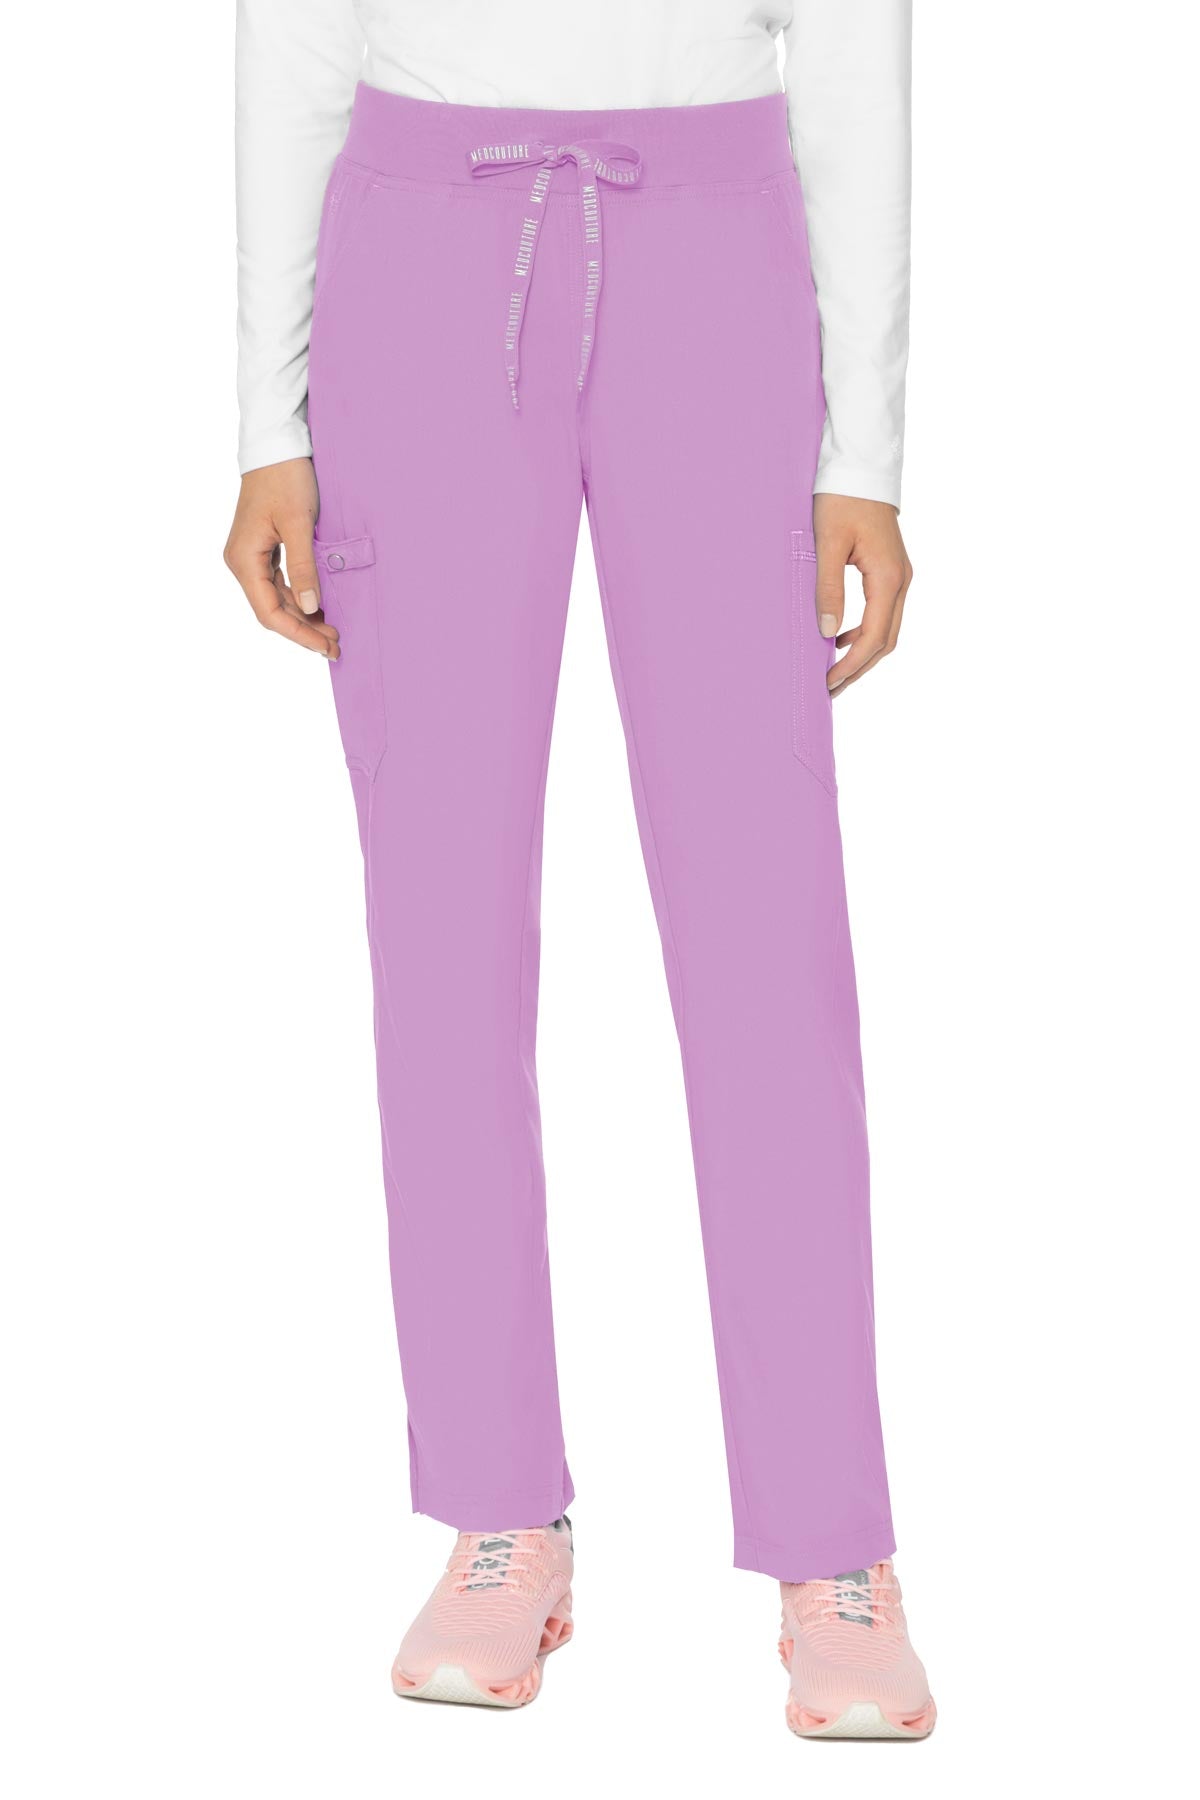 Med Couture Lilac PANT